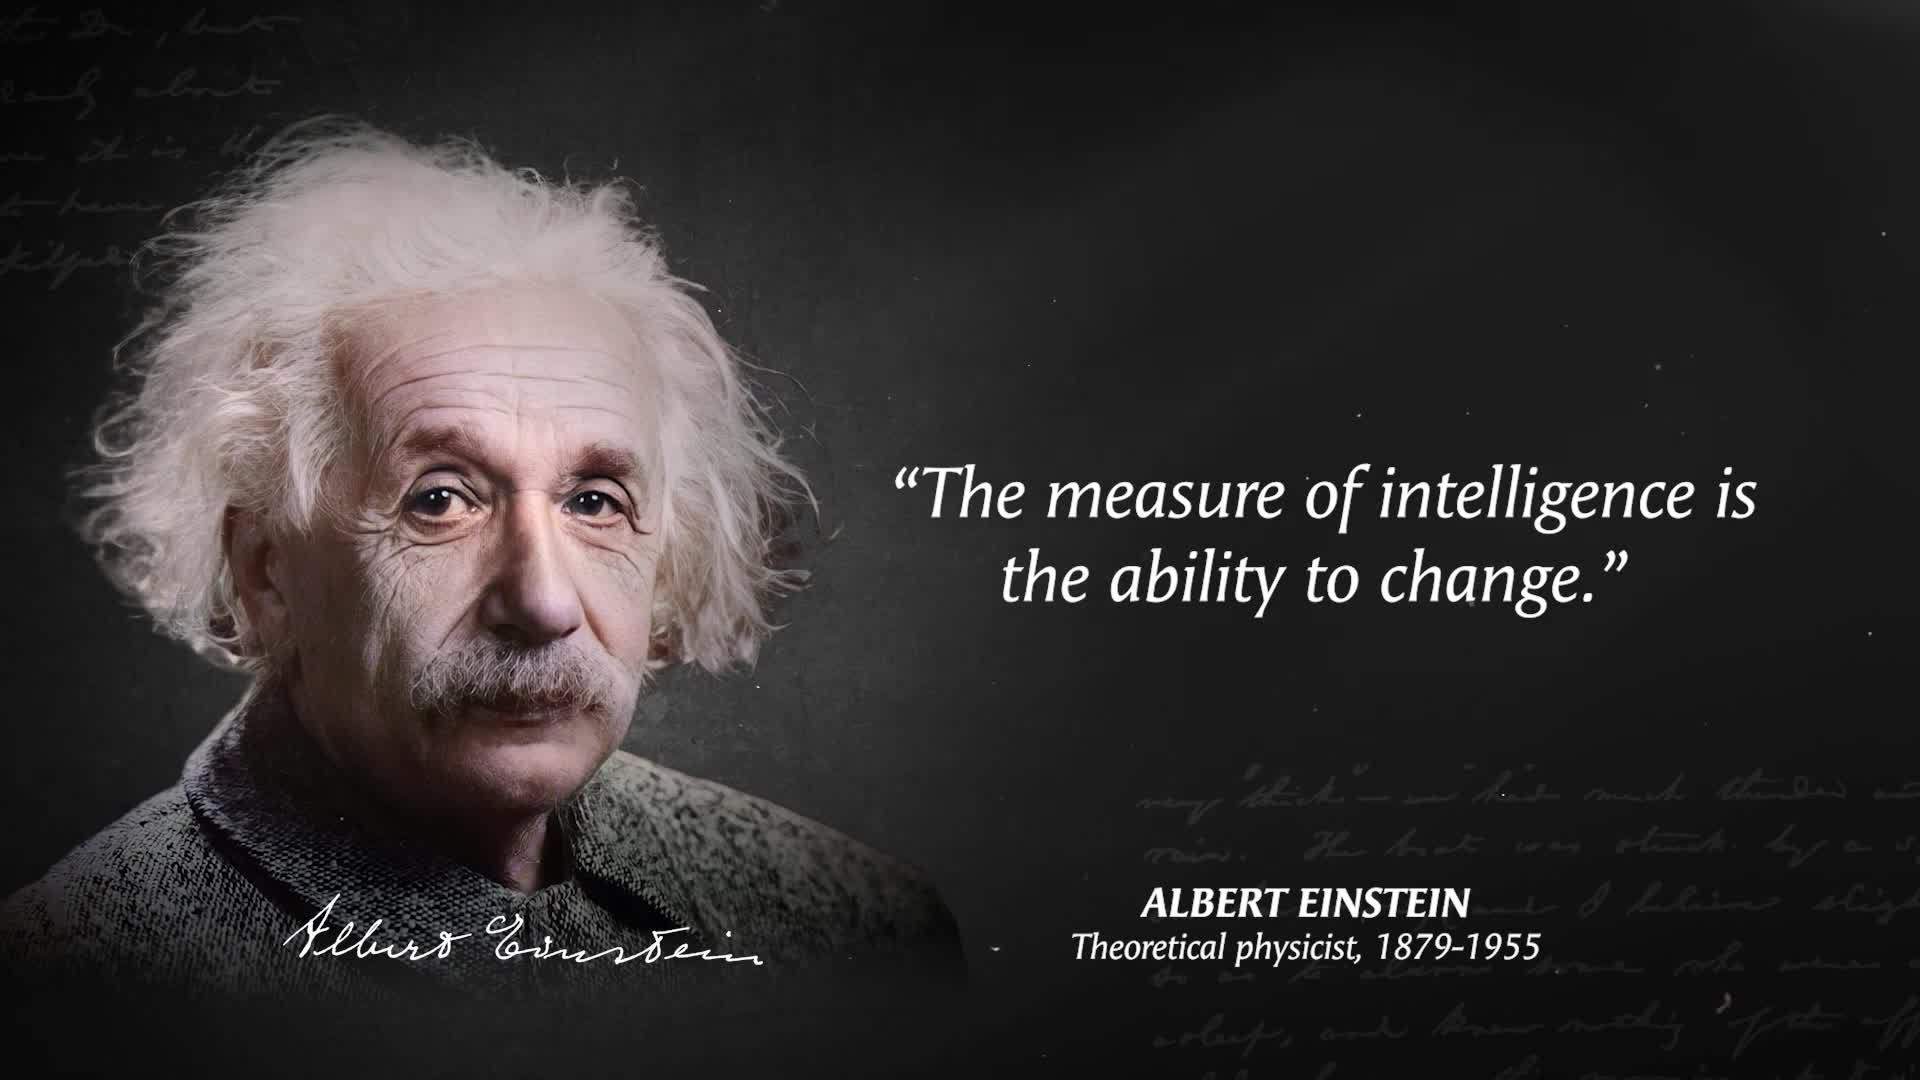 Quotes from Albert Einstein You Should Know Before You Age!